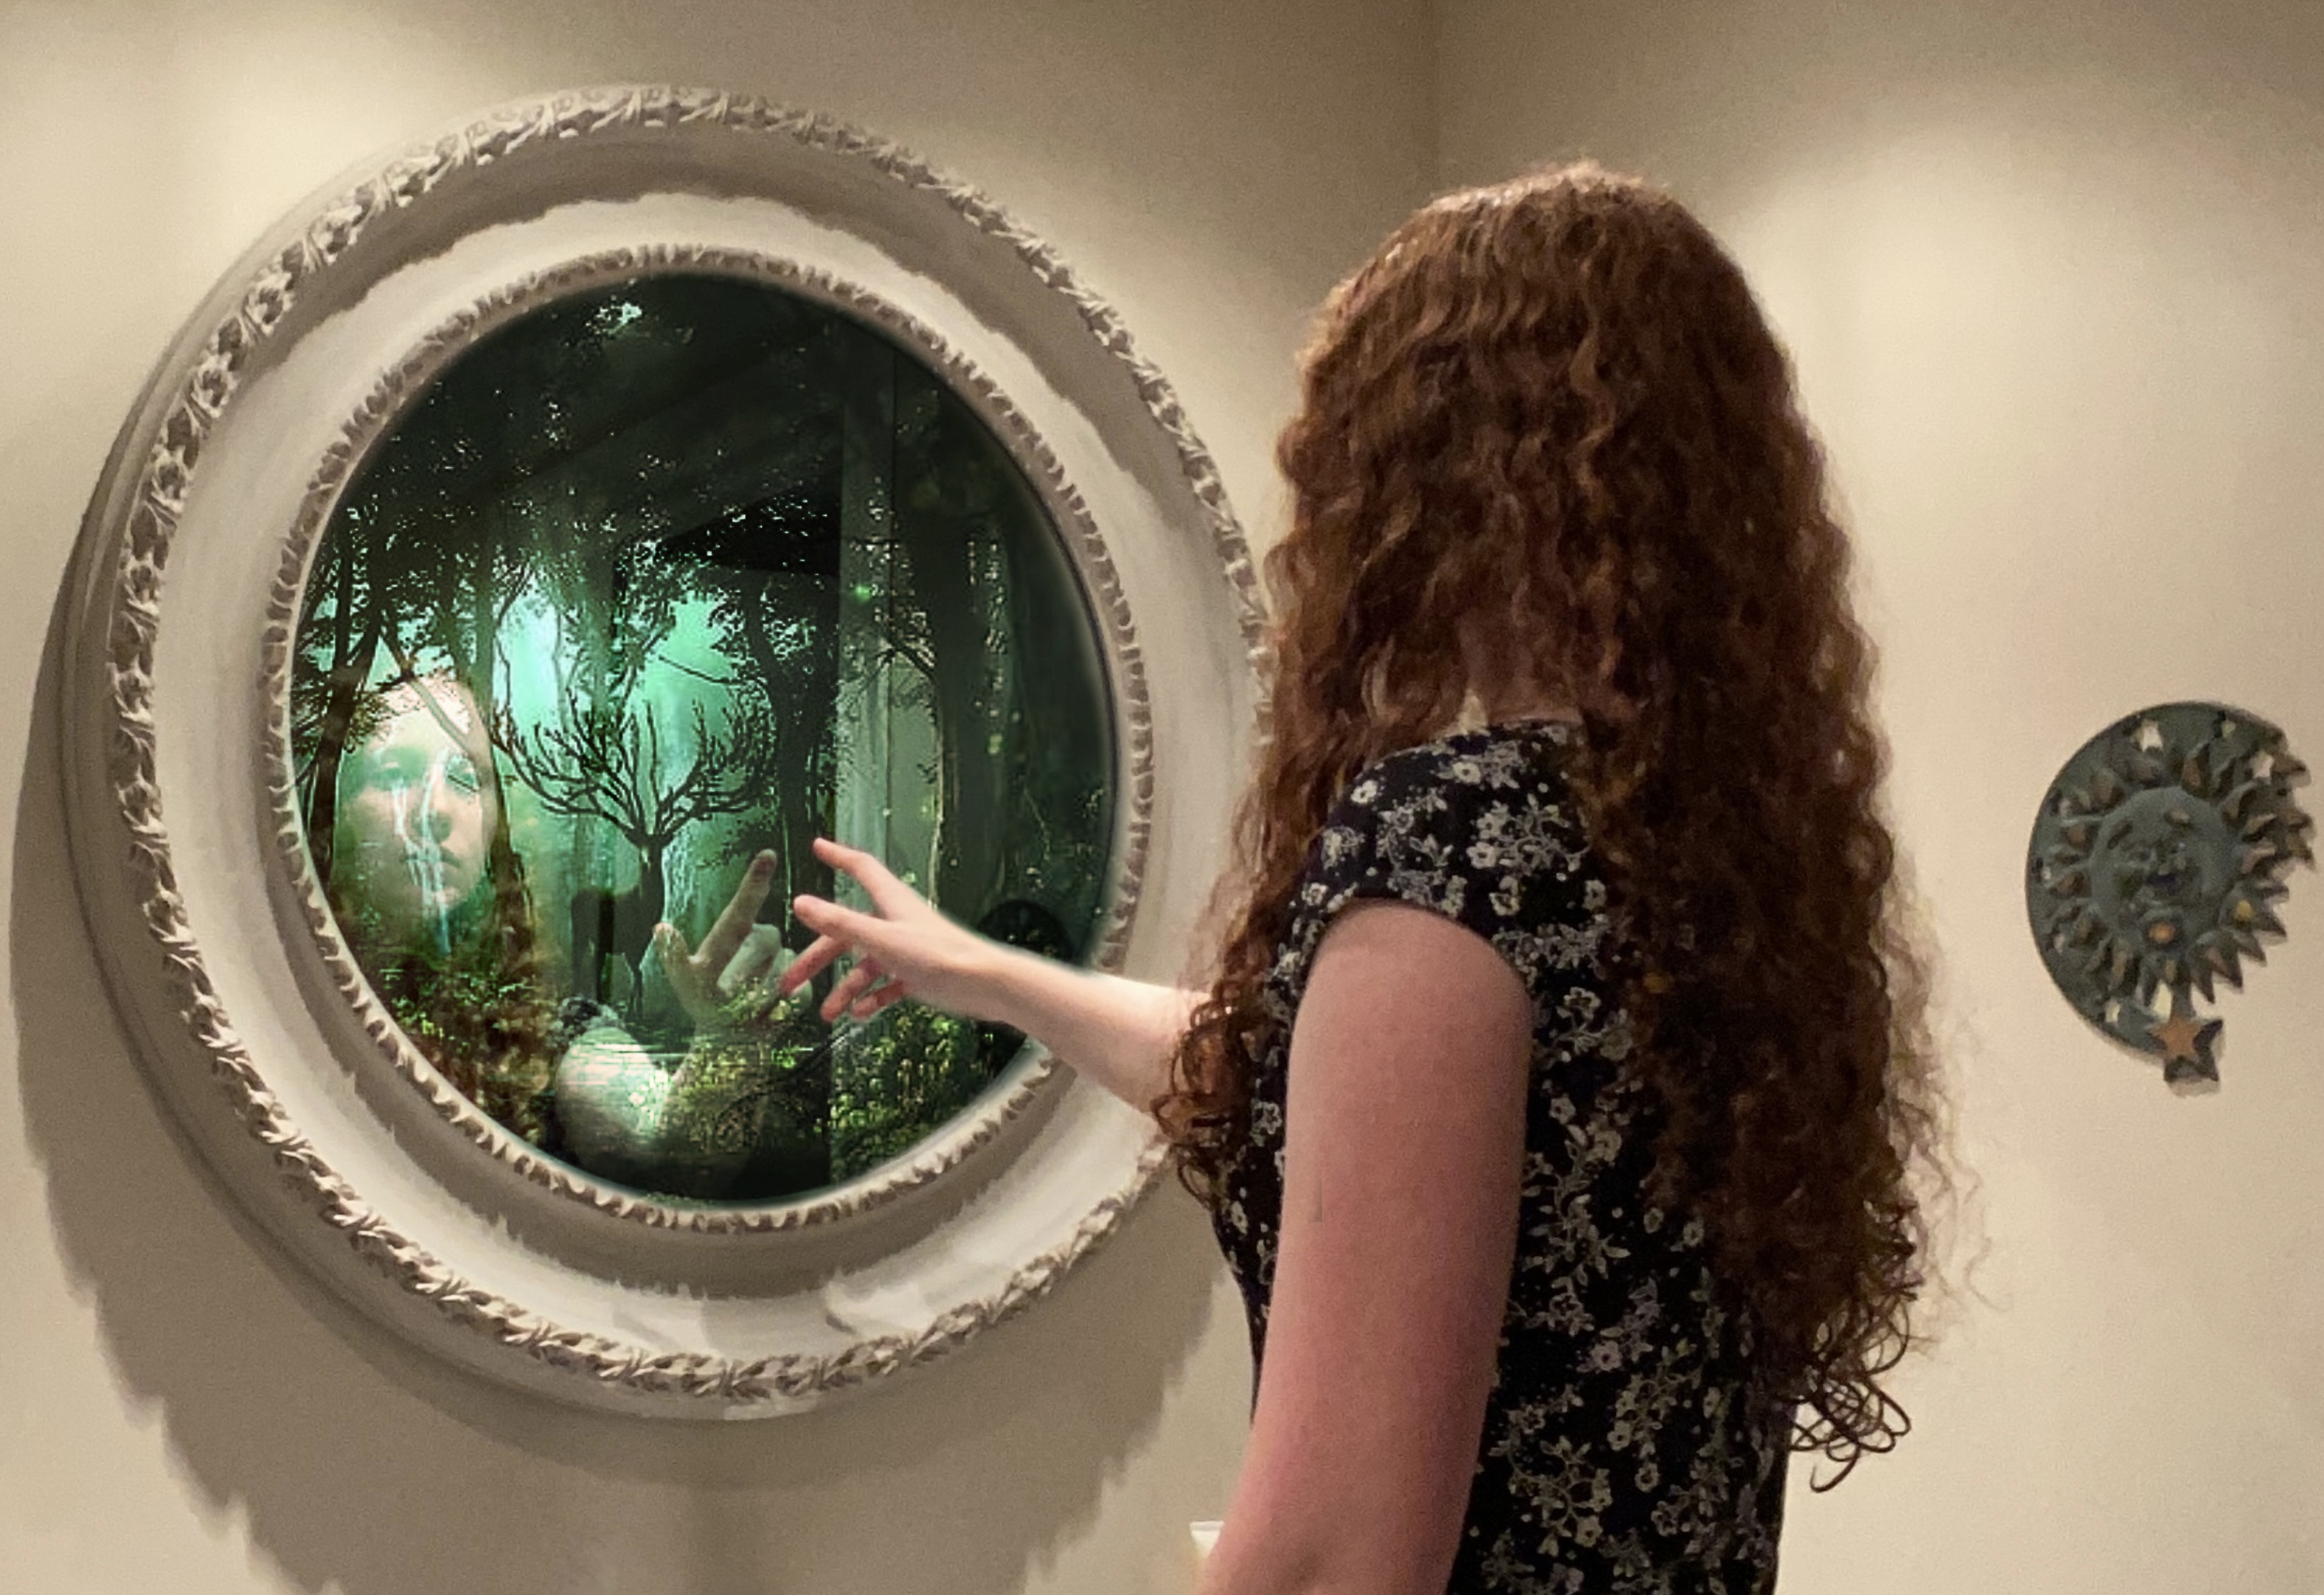 woman looking into mirror that shows forest scene